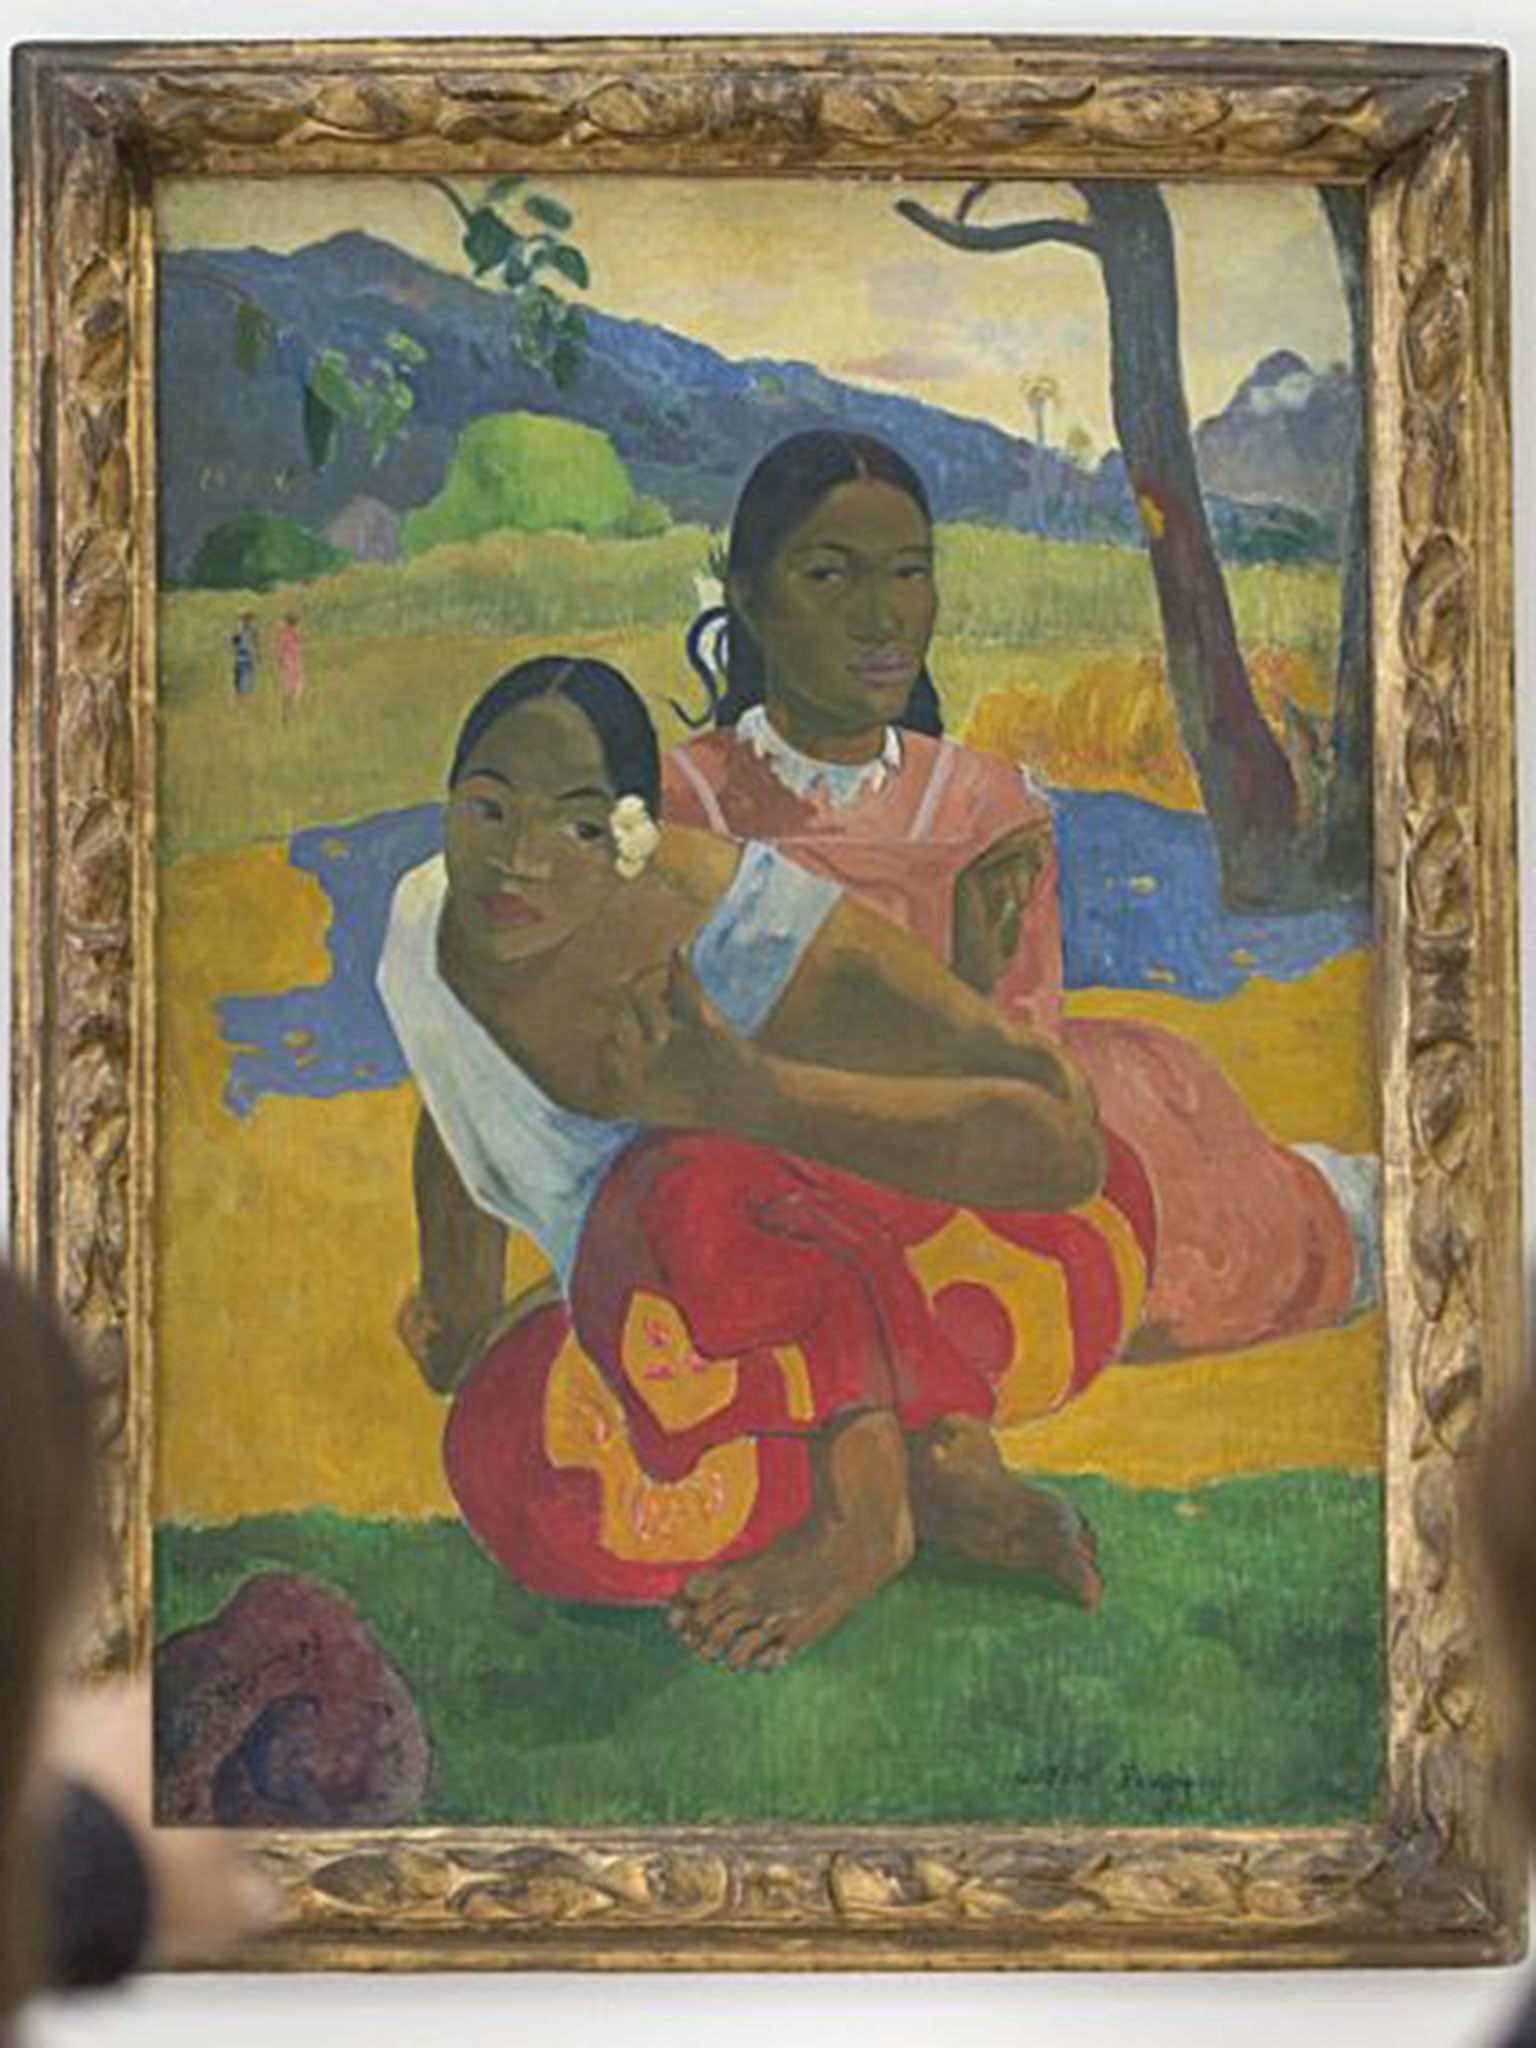 Gauguin was a master of harmonious colour relationships